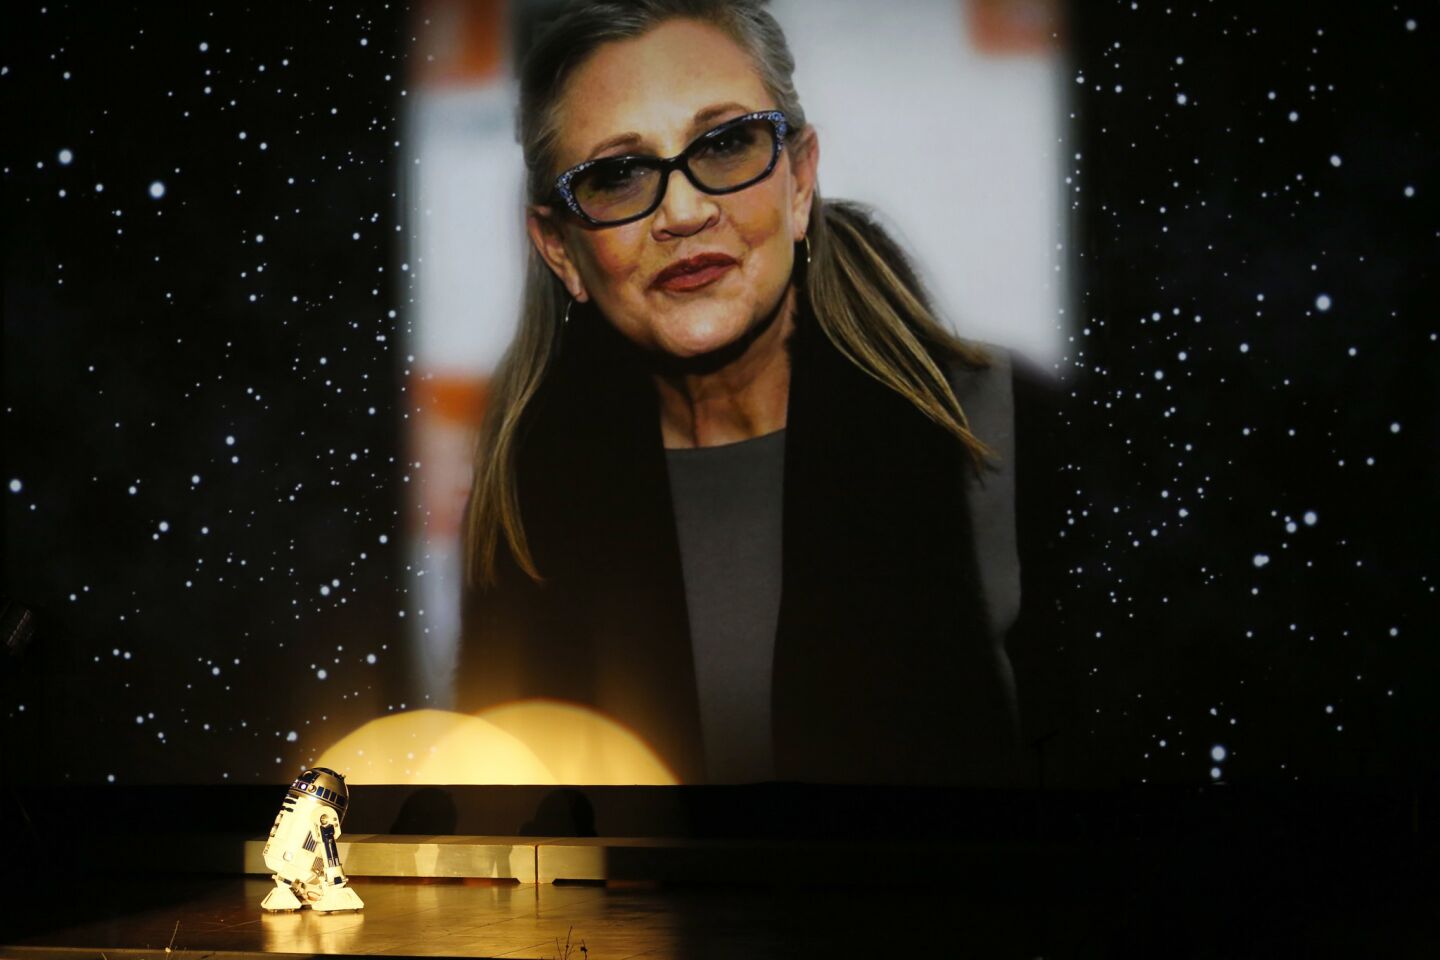 R2-D2 says goodbye under a giant photograph of Carrie Fisher during the memorial for Debbie Reynolds and Carrie Fisher at the Forest Lawn Memorial-Park in the Hollywood Hills.